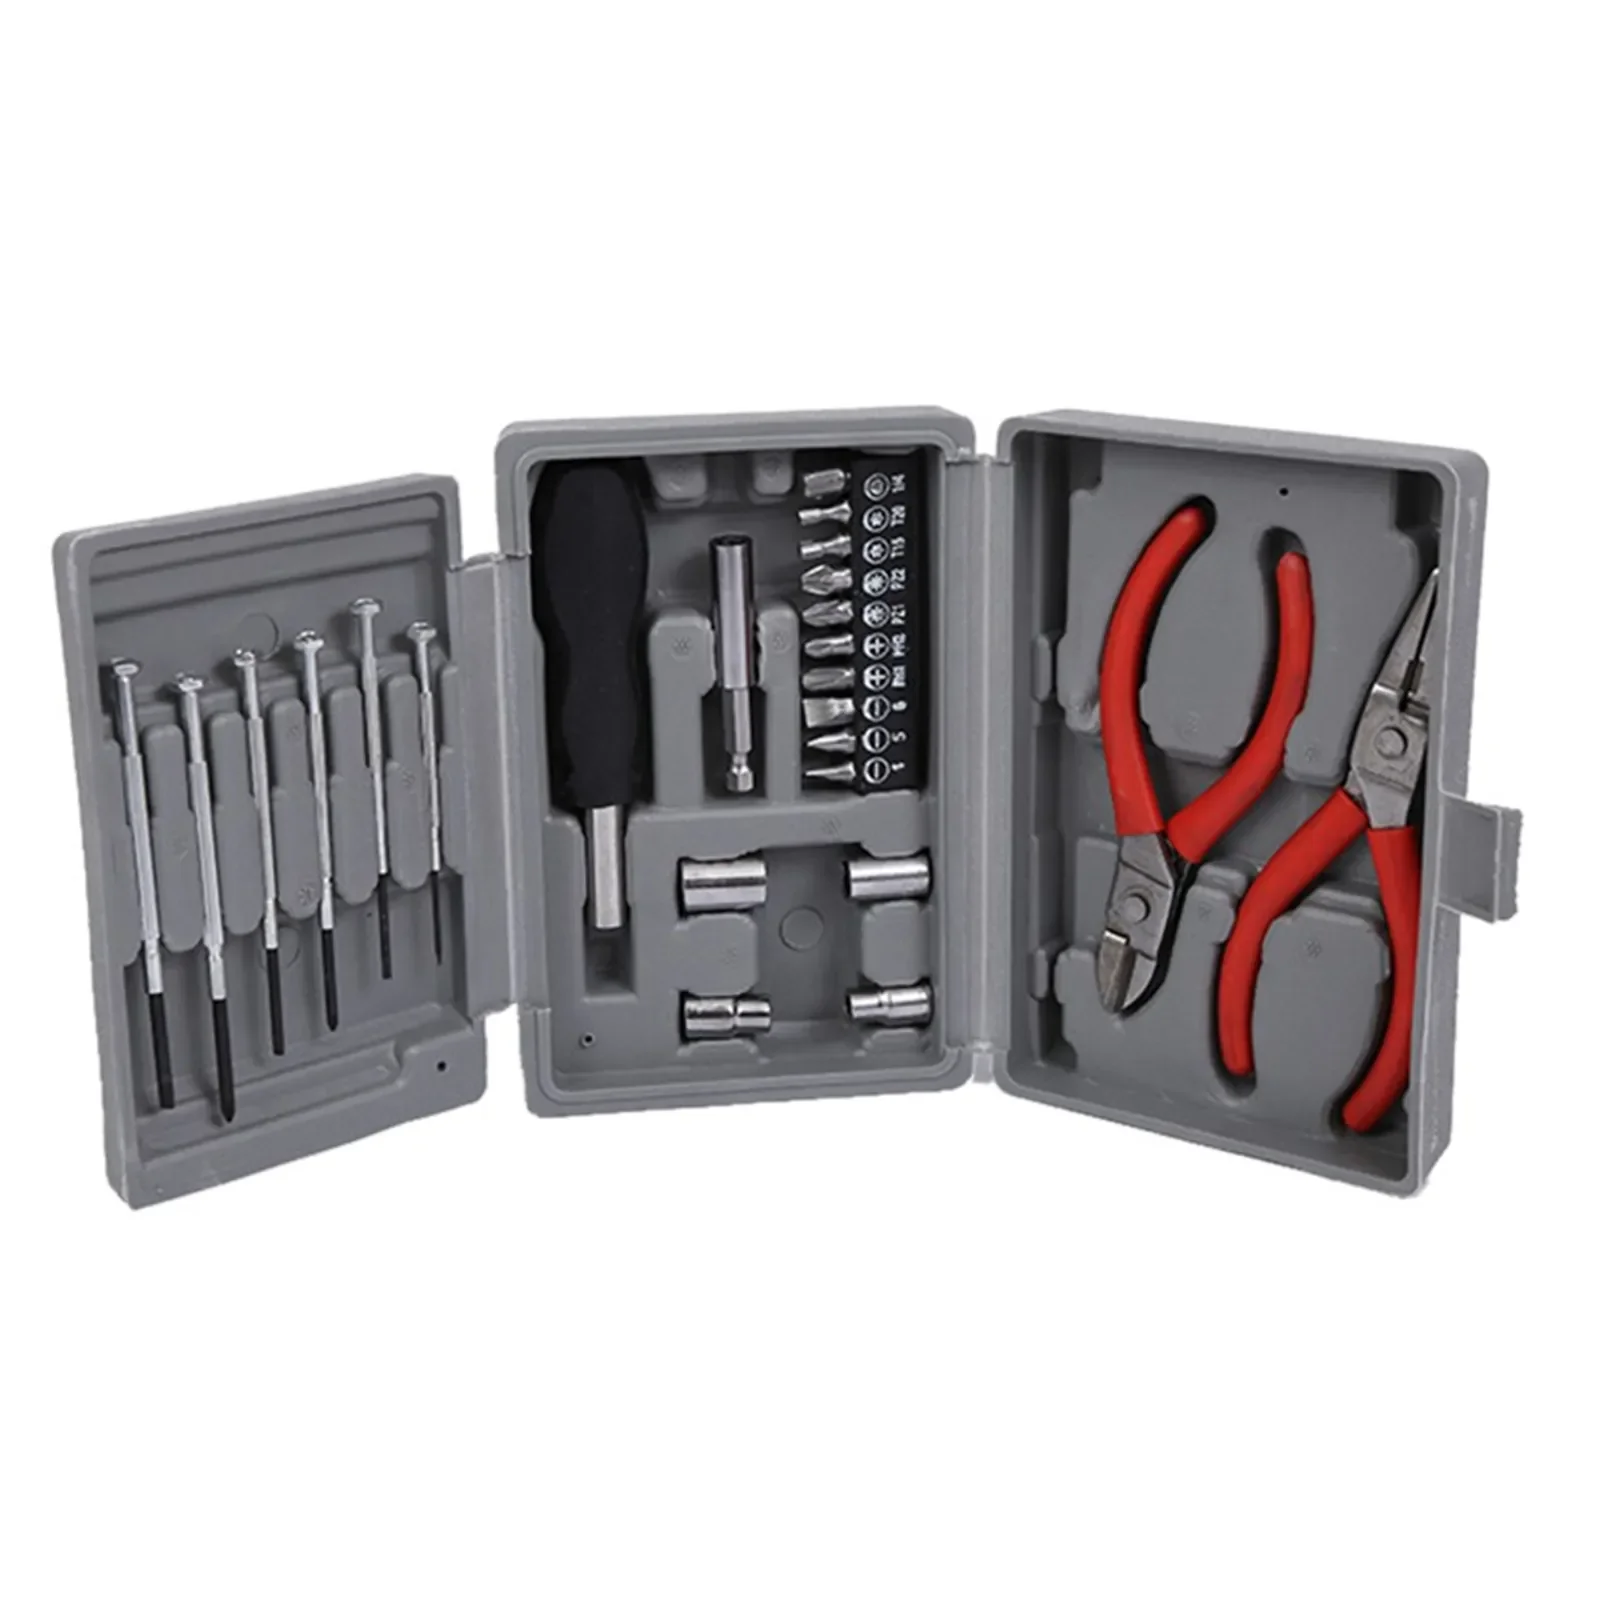 

Home-hardware Combination Toolbox General Household Hand Tool Kit Pliers Screwdrivers Sets